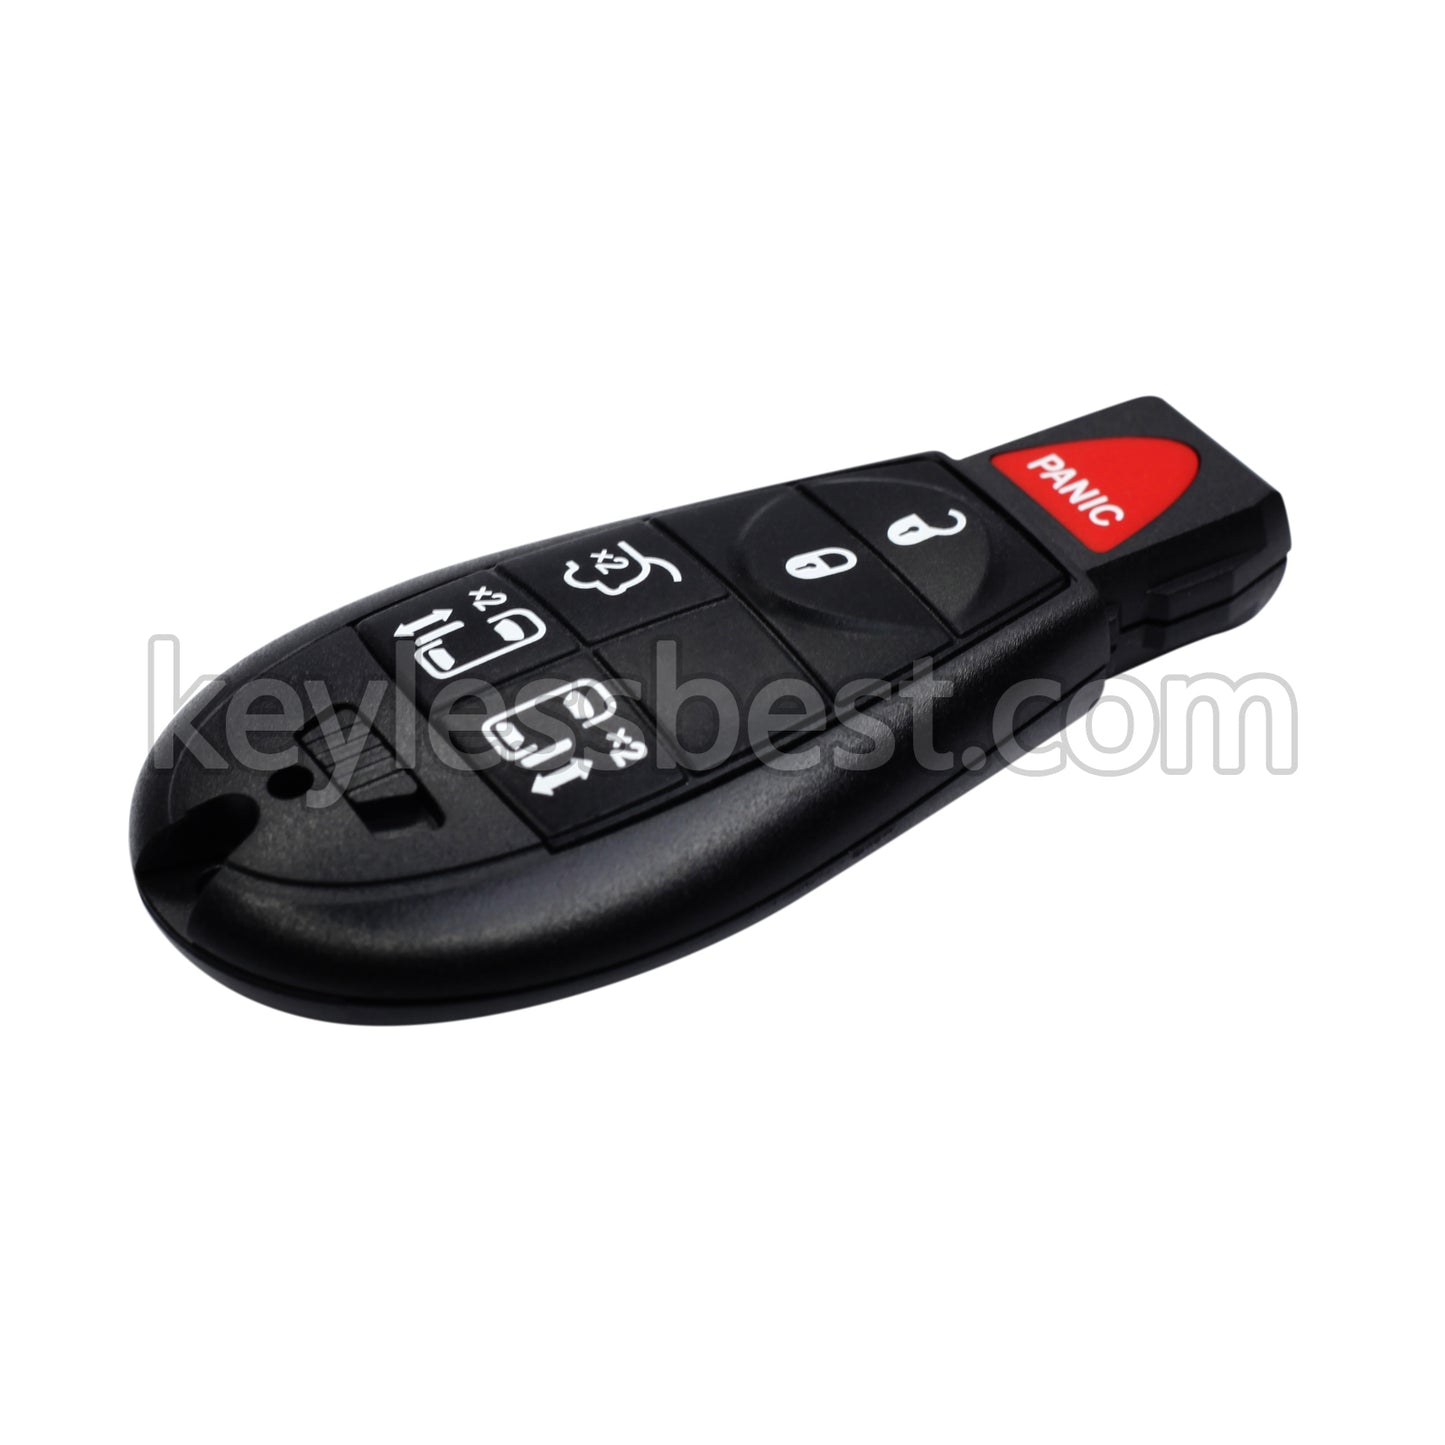 2006-2018 Chrysler Dodge Volkswagen Routan Jeep / 6 Buttons Remote Key / M3N5WY783X / 433MHz